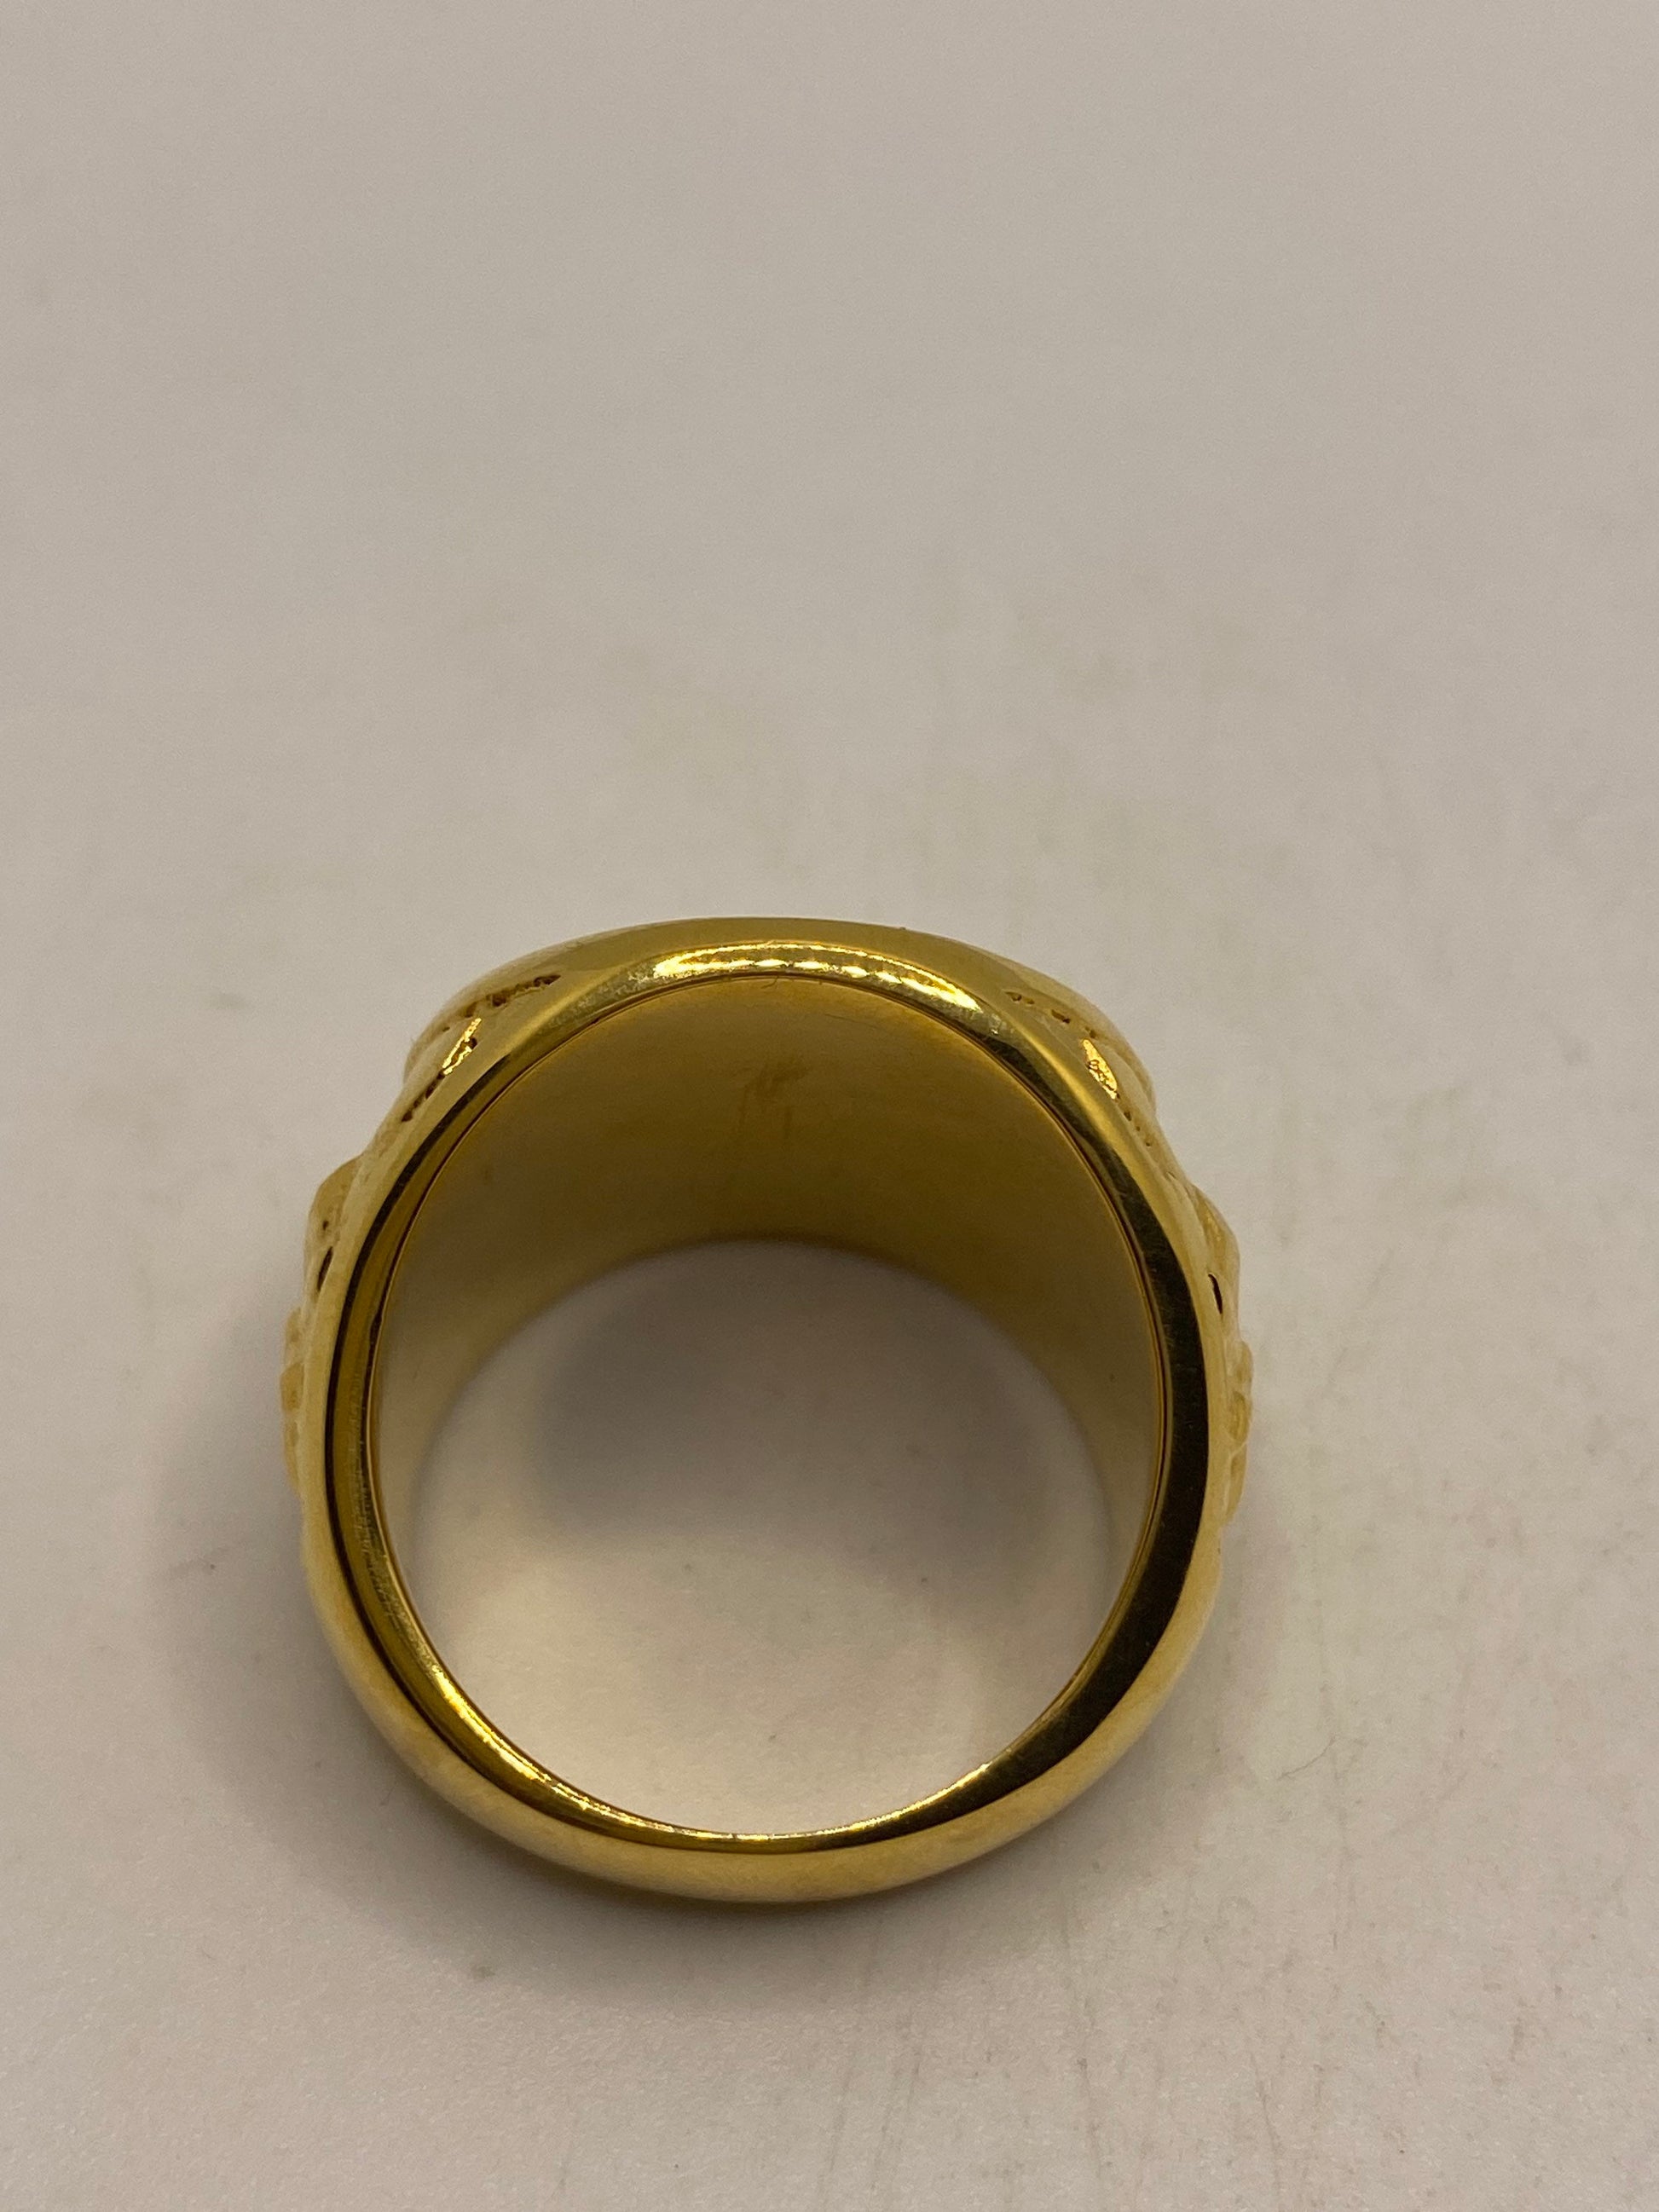 Vintage Yellow Gold Stainless Steel Ring Size 11